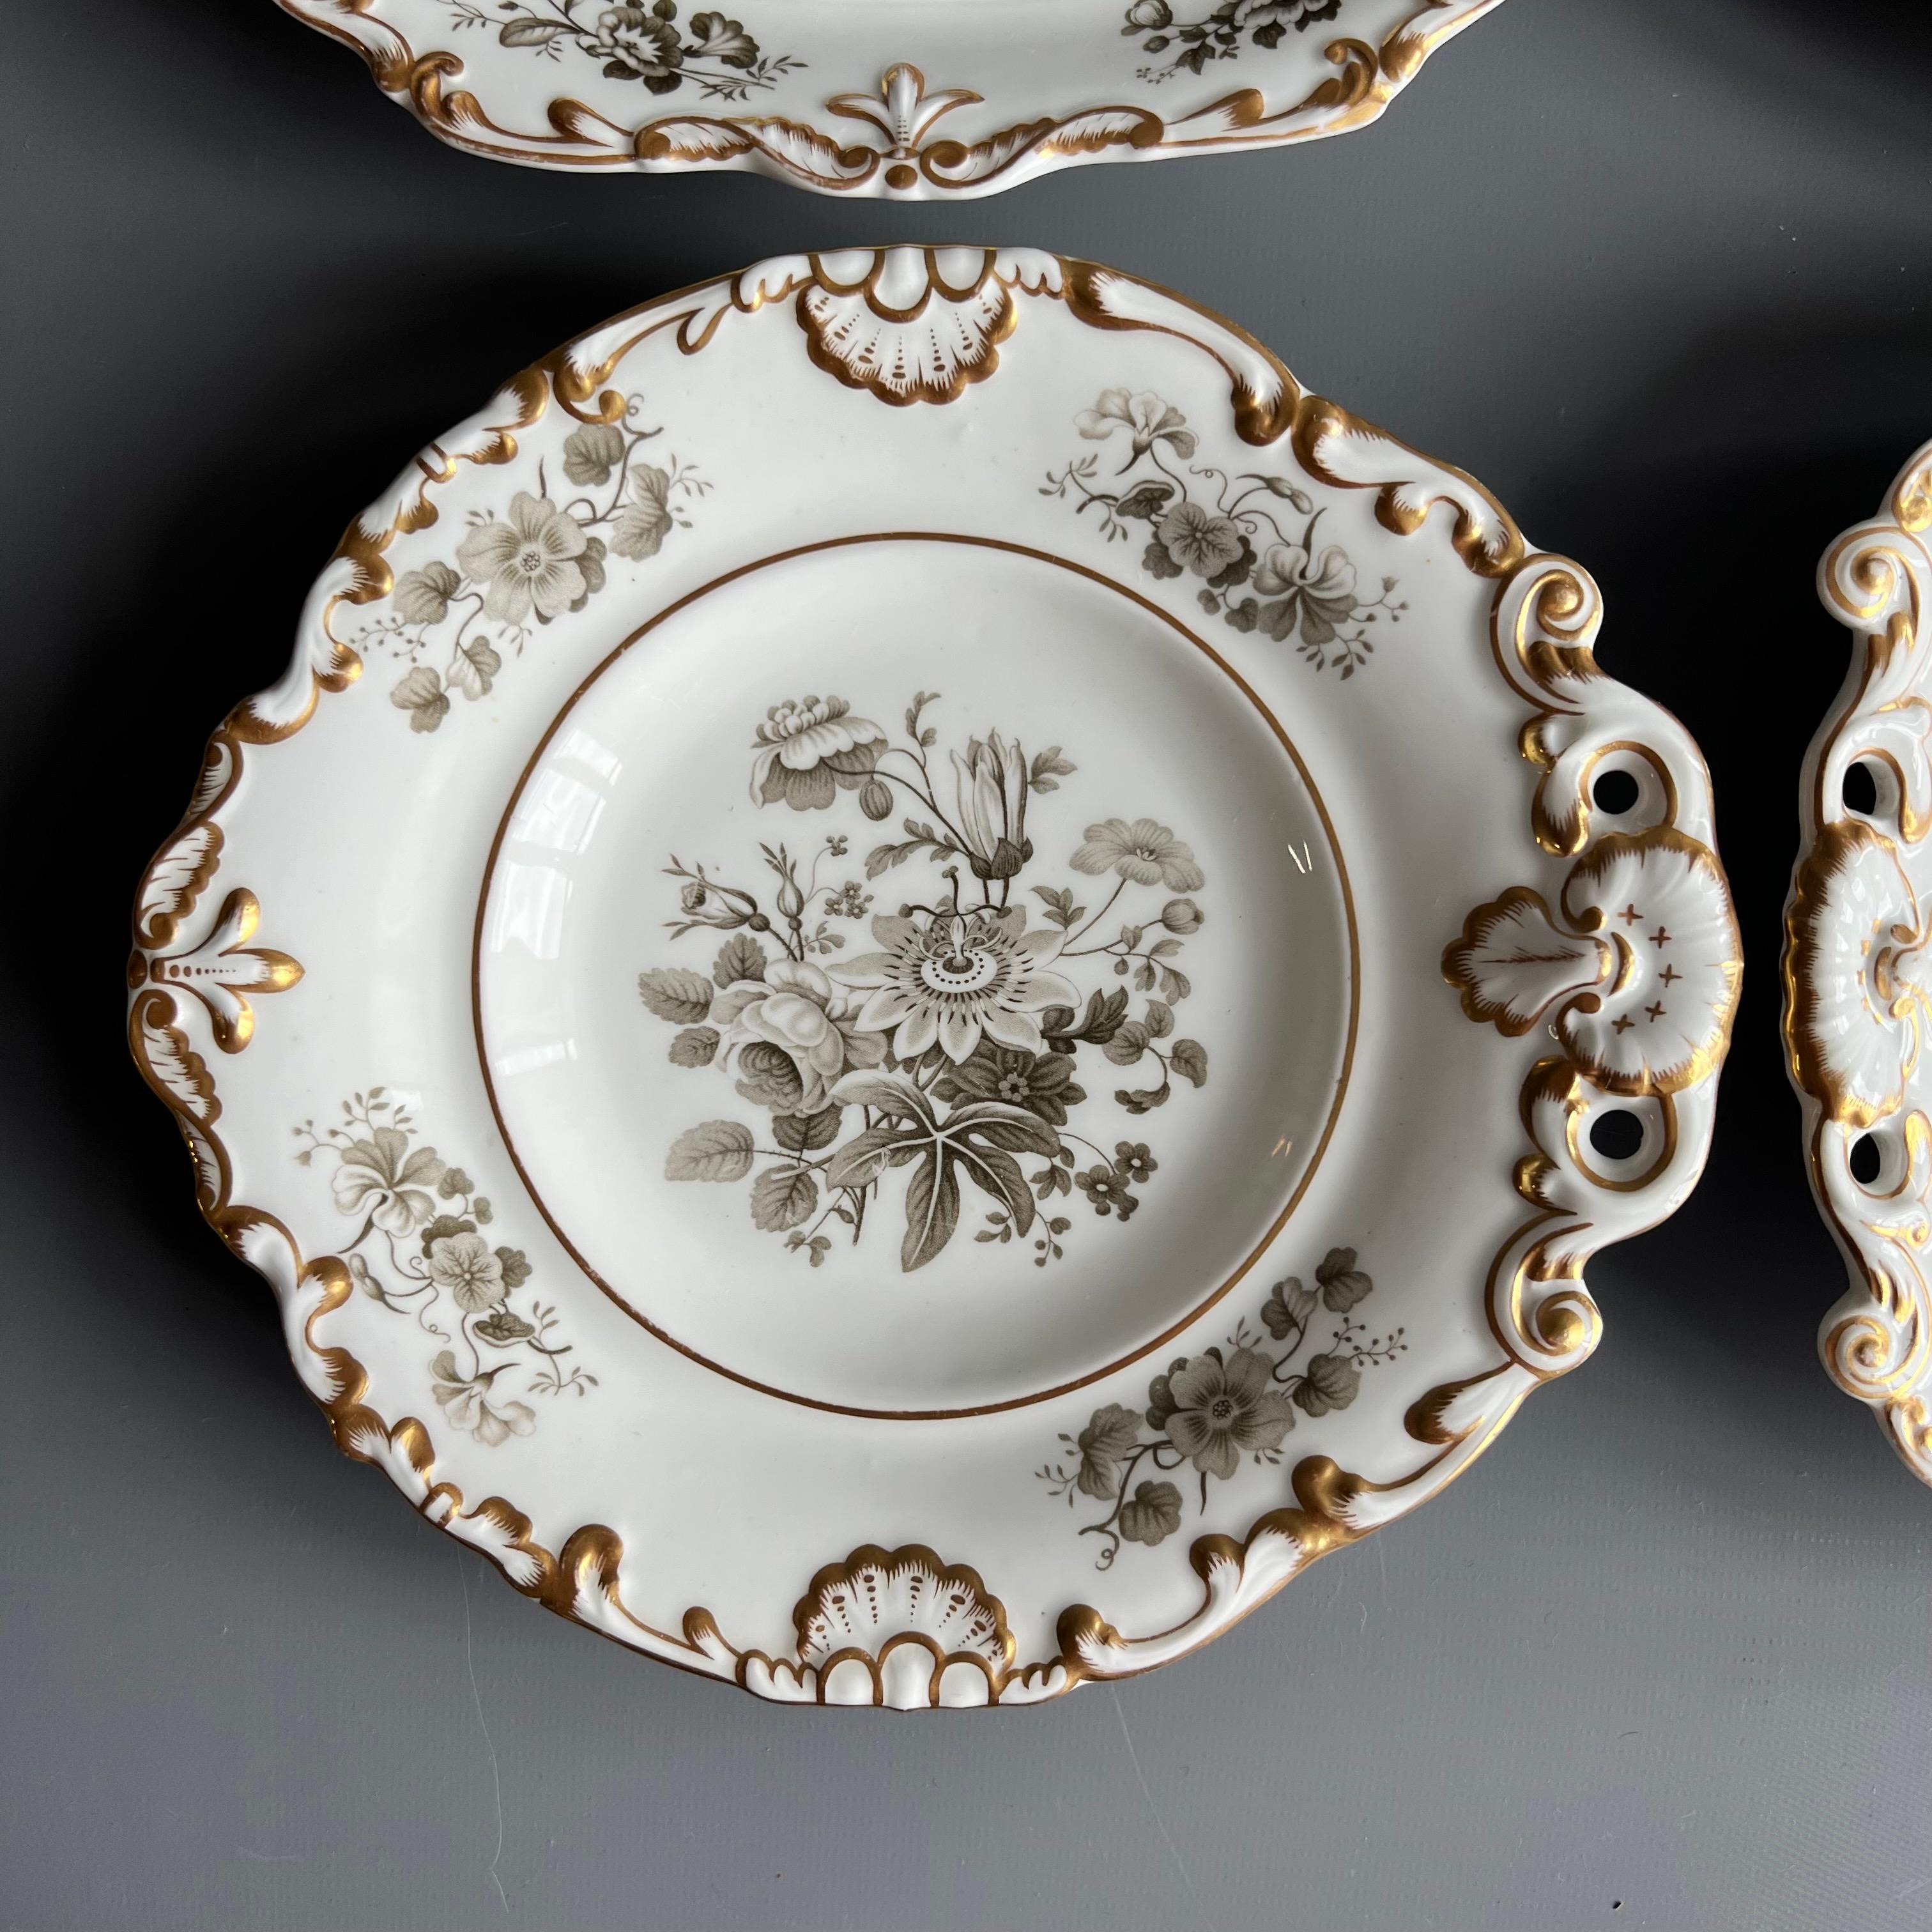 Minton Dessert Service, Inverted Shell White with Monochrome Flowers, ca 1830 For Sale 9